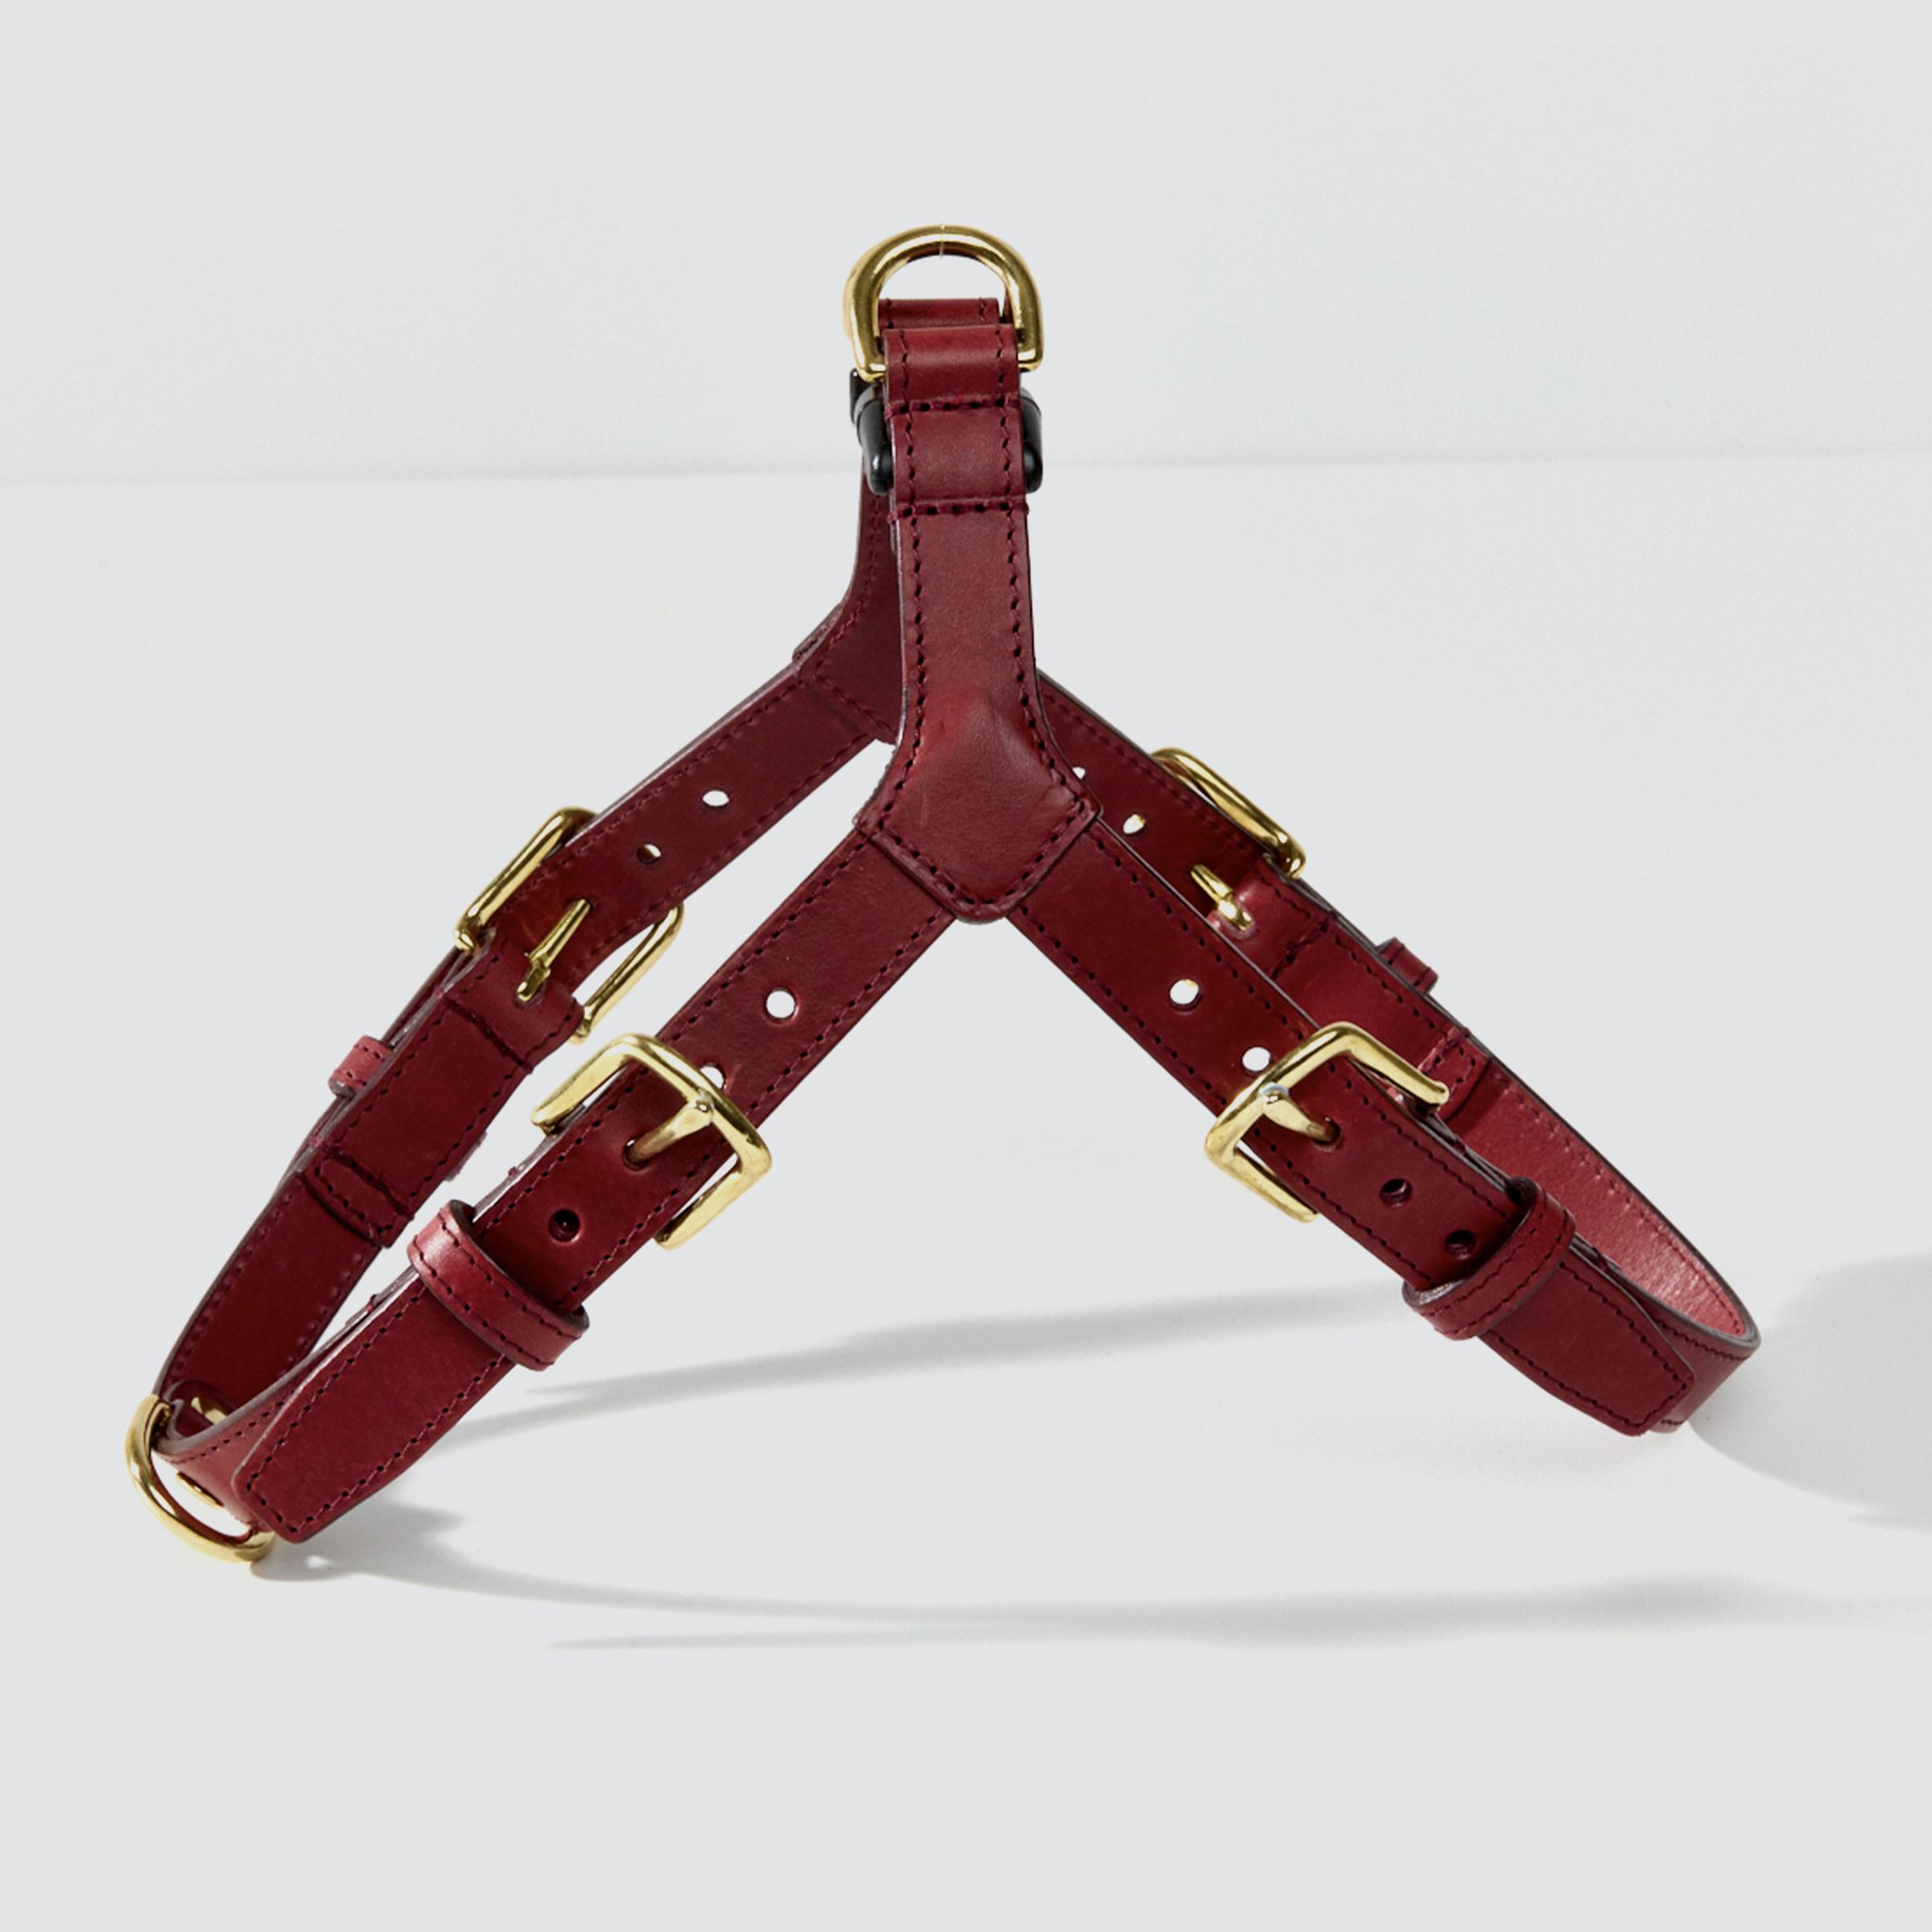 One-click Leather Dog Harness – Red